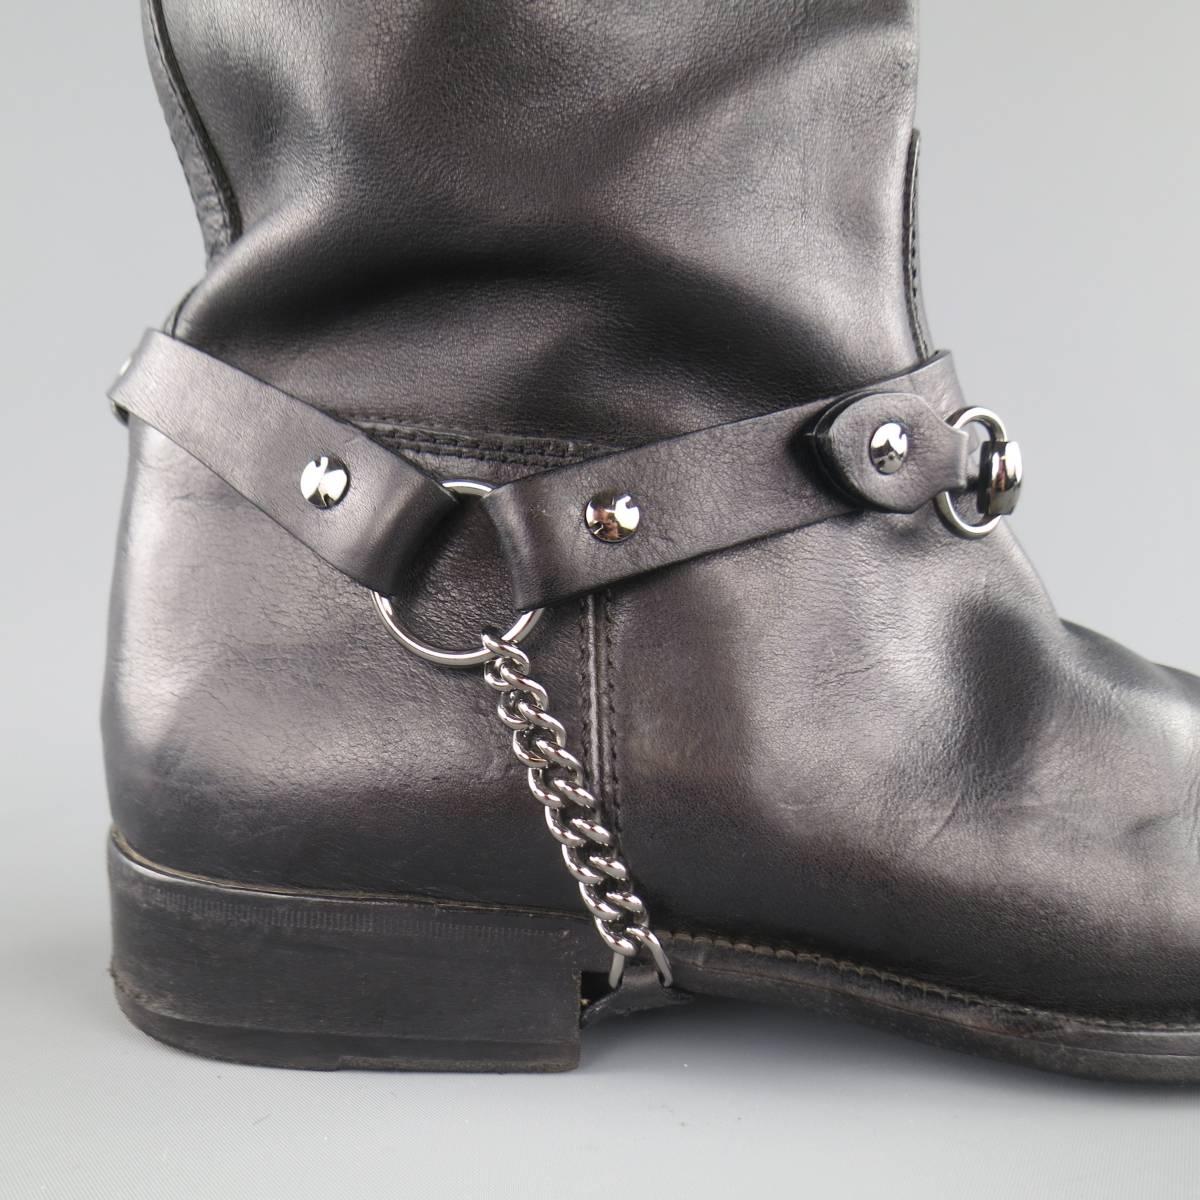 GUCCI knee high biker boots come in black leather and feature a round toe, internal red and green stripe web pulls, and leather chain ankle harnesses with horsebit detail that can be worn both ways. Made in Italy.
 
Good Pre-Owned Condition.
Marked: